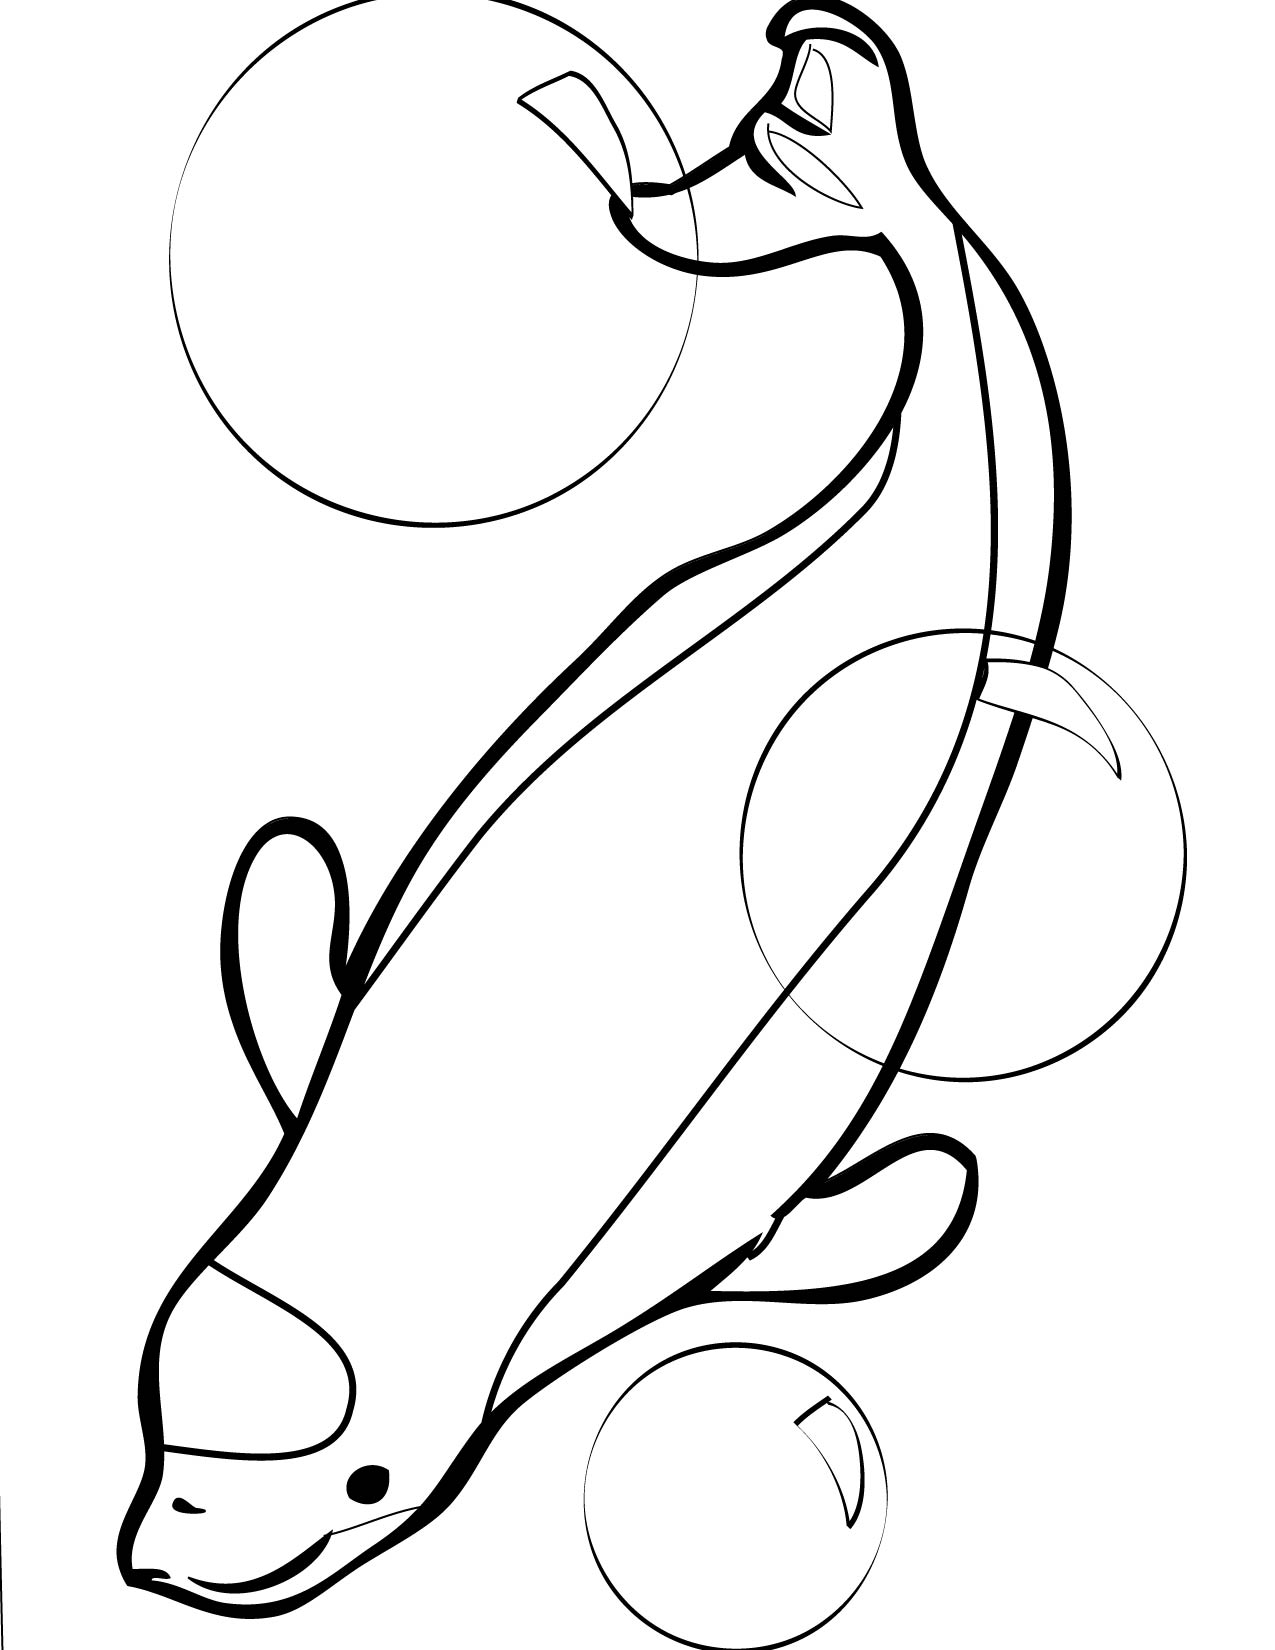 Beluga Whale Coloring Page - Handipoints